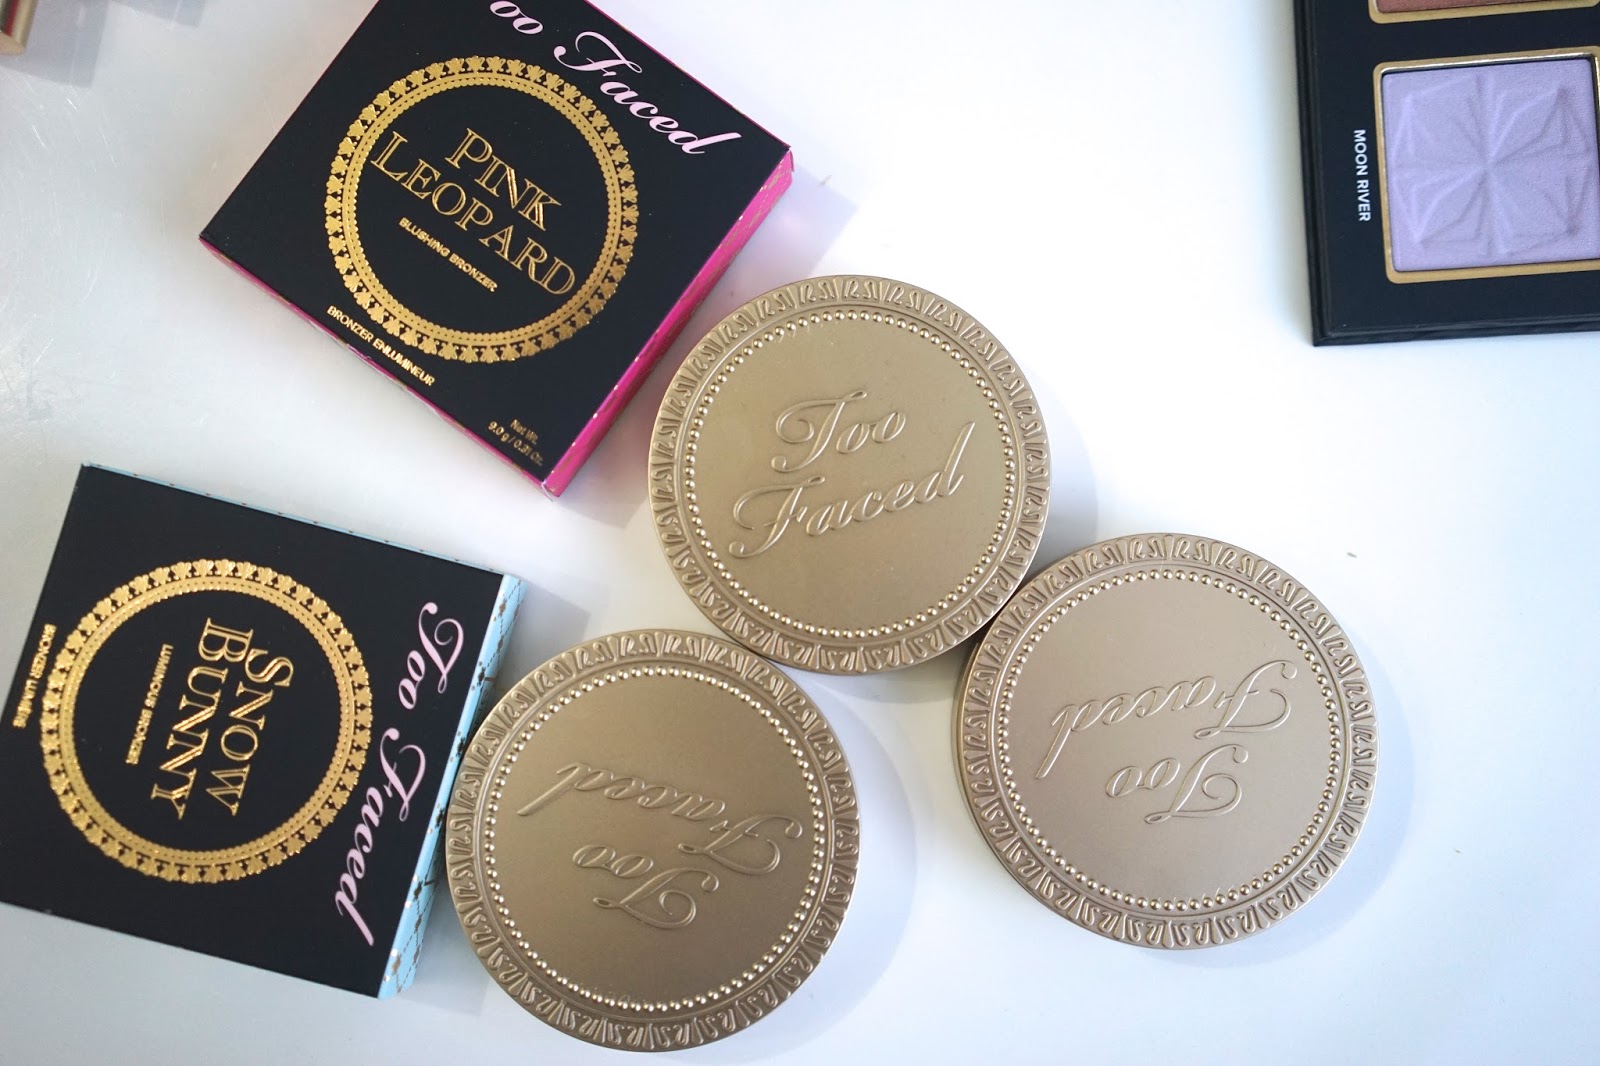 Too Faced bronzers